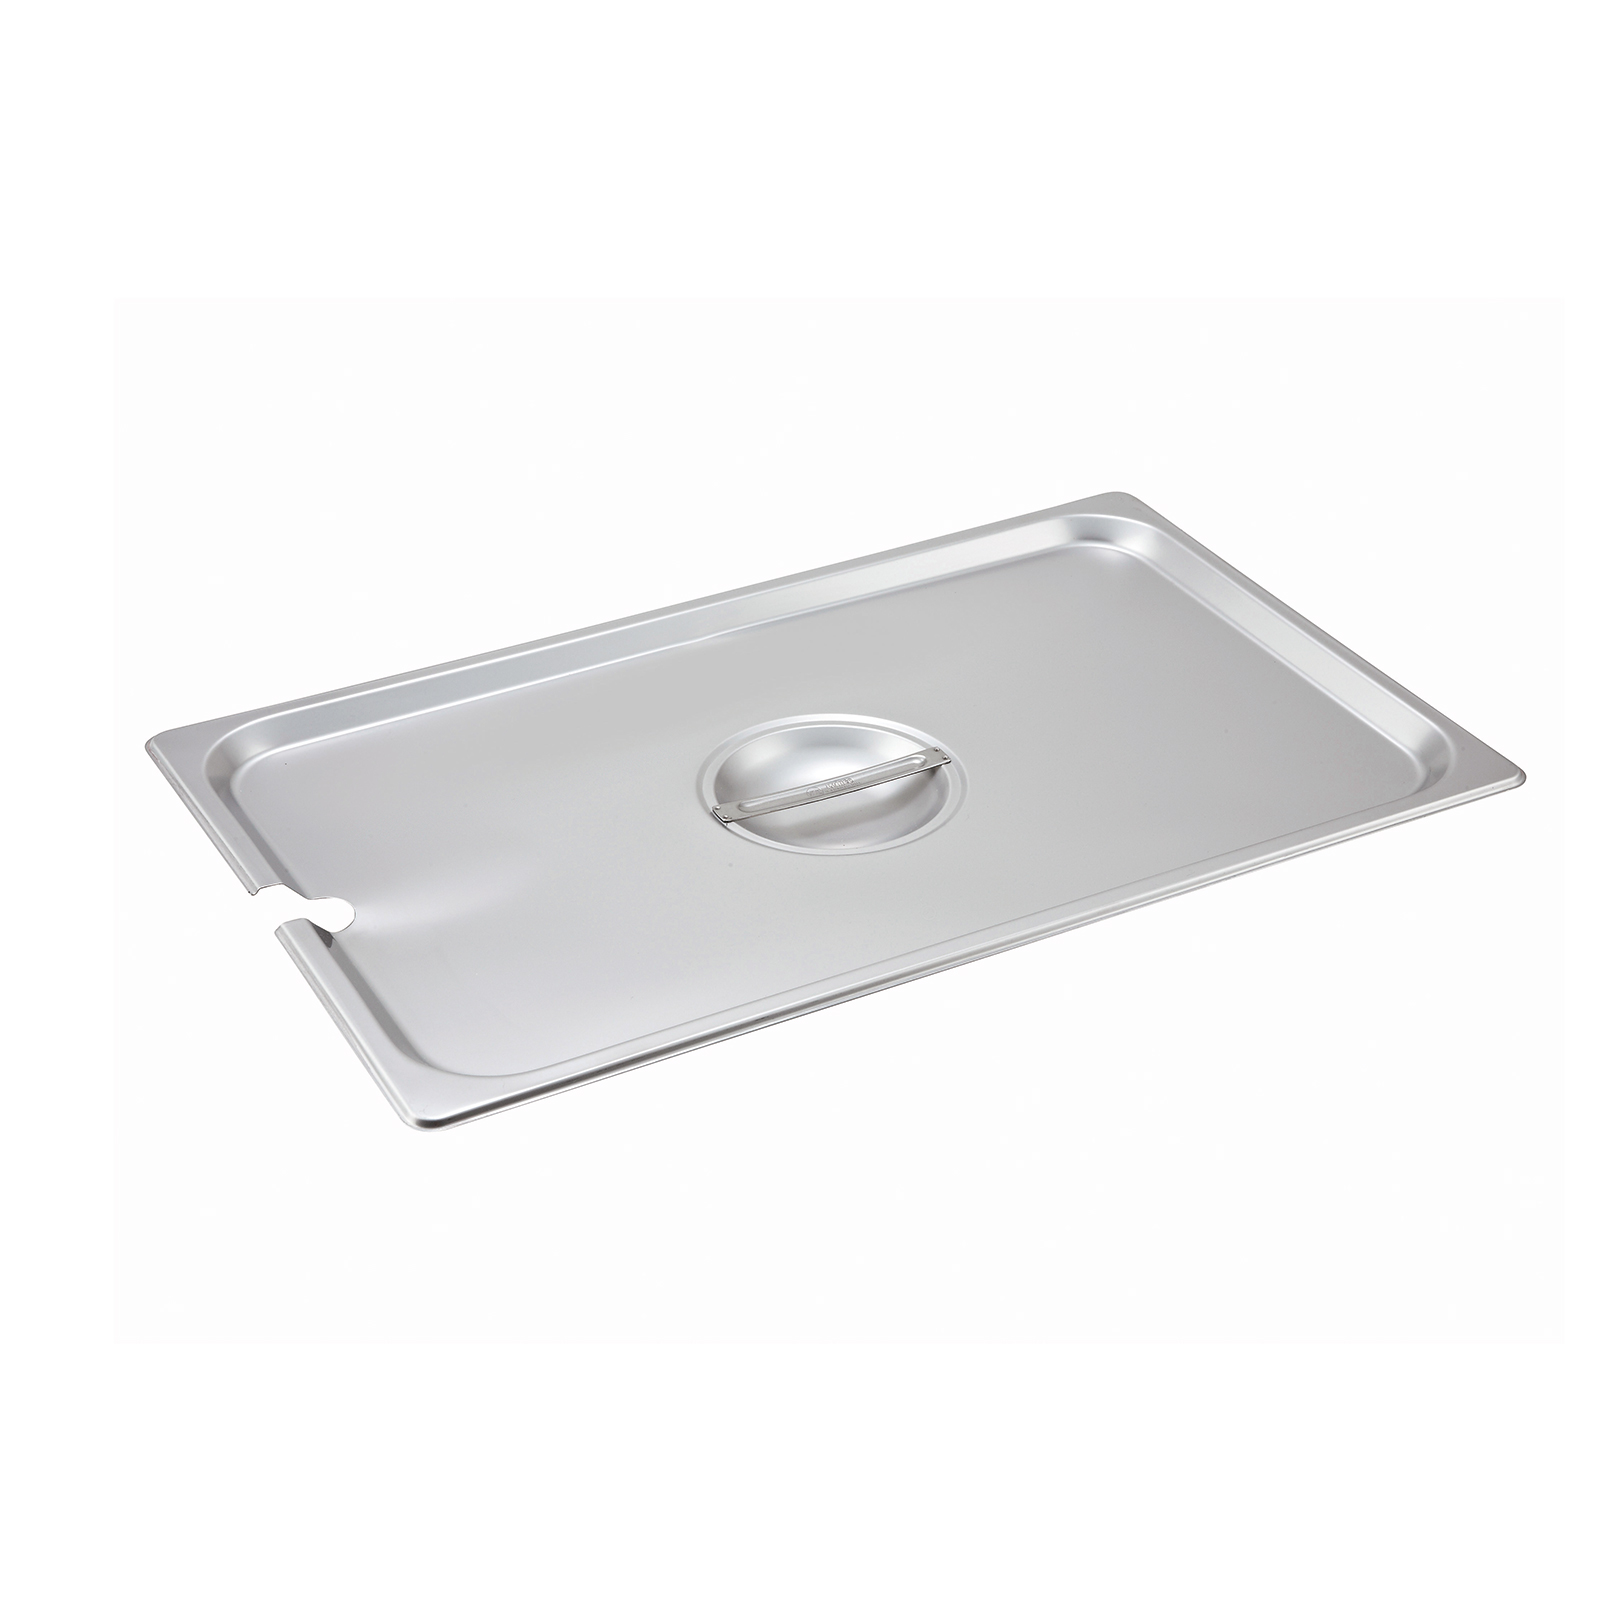 Lid for Steam-Table Pan: Full Size Slotted